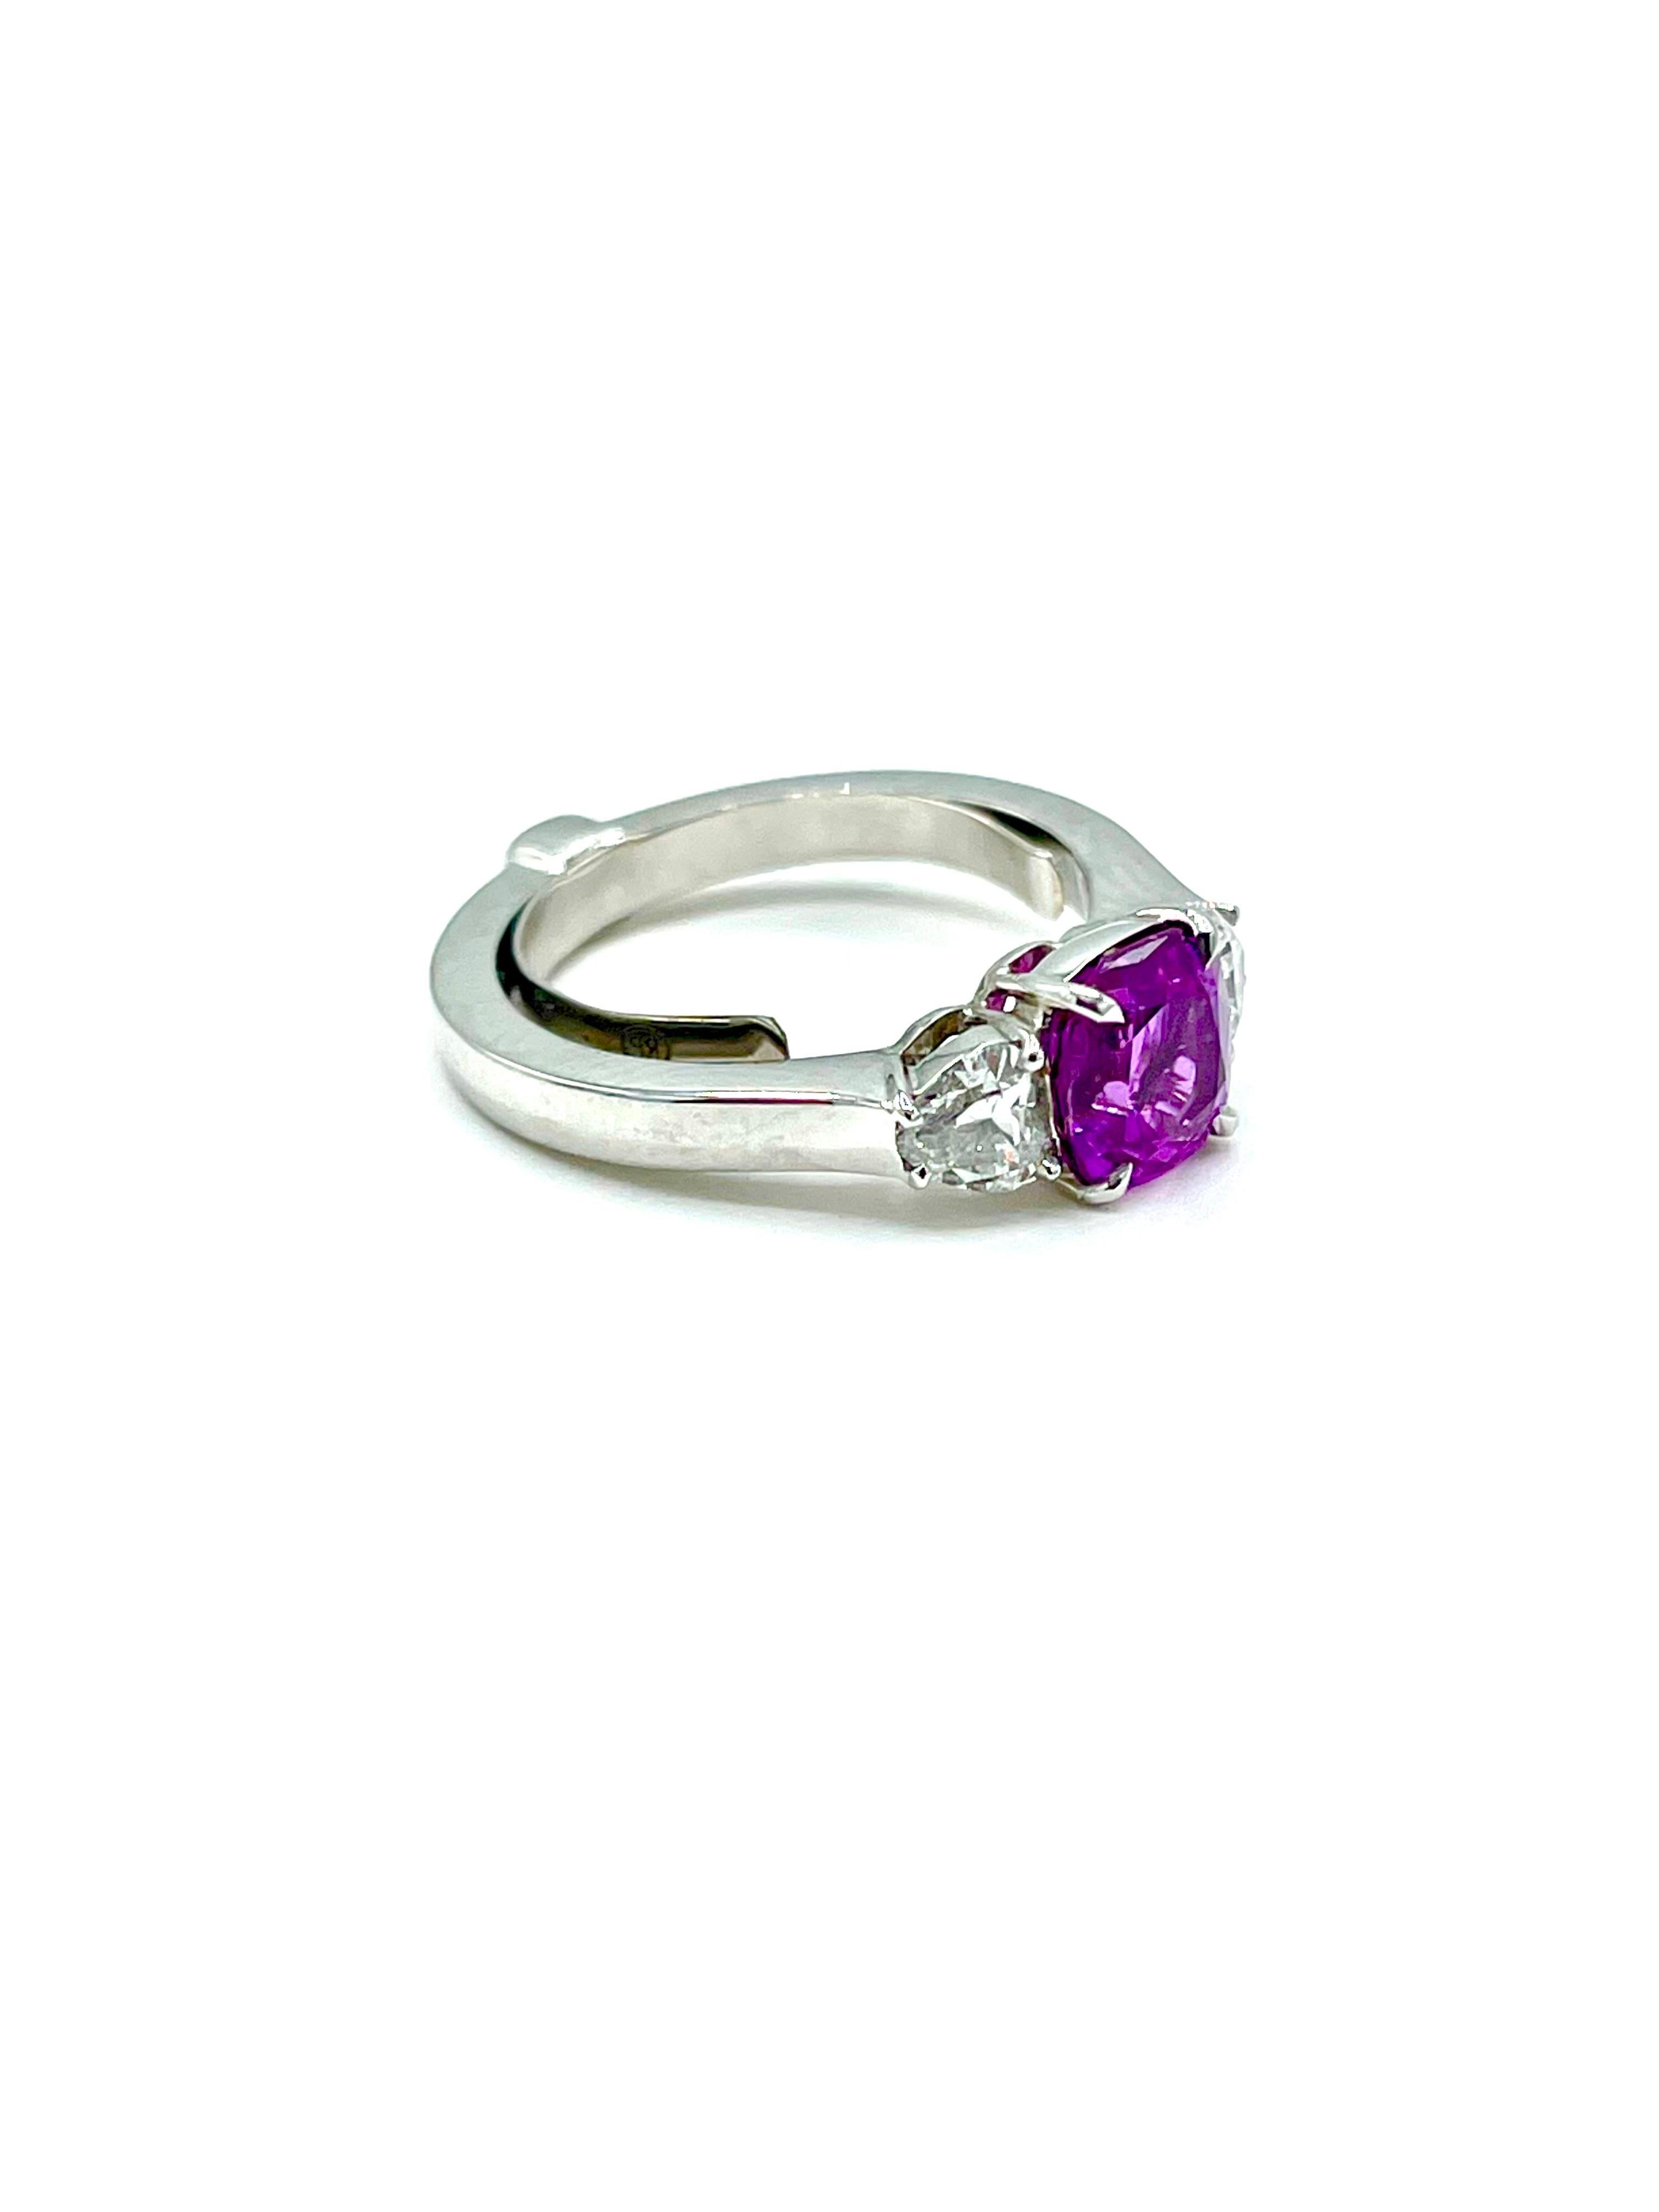 Robert Procop 2.05 Carat Cushion Shaped Pink Sapphire and Diamond Ring In New Condition For Sale In Chevy Chase, MD